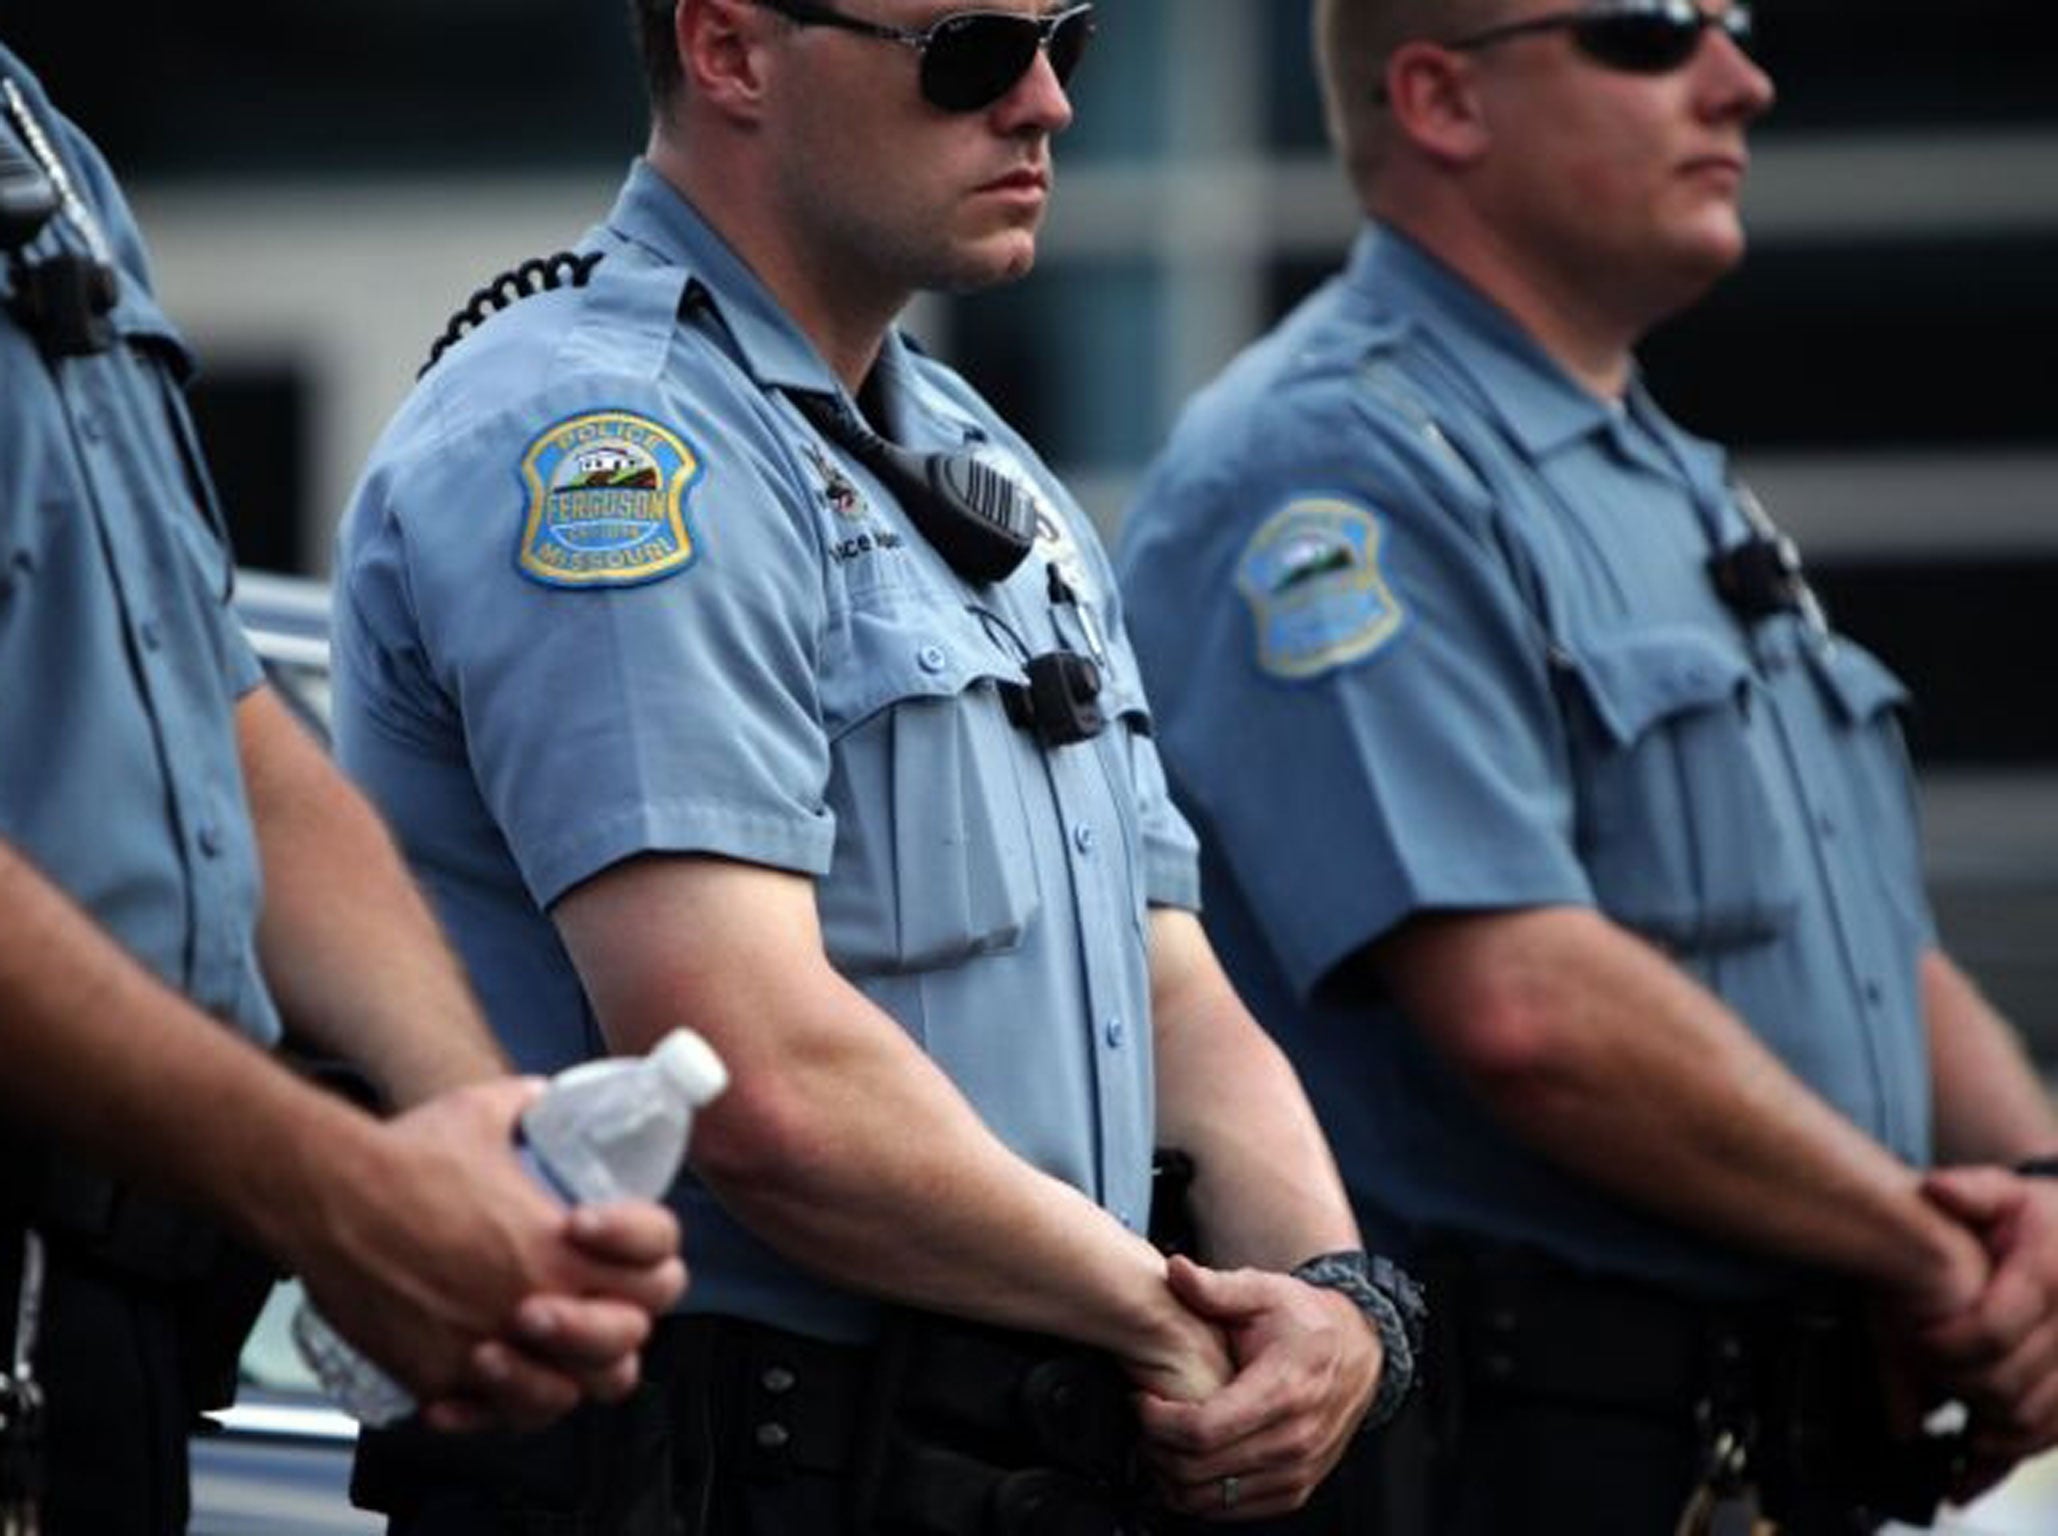 Police officers wear what appear to be body cameras